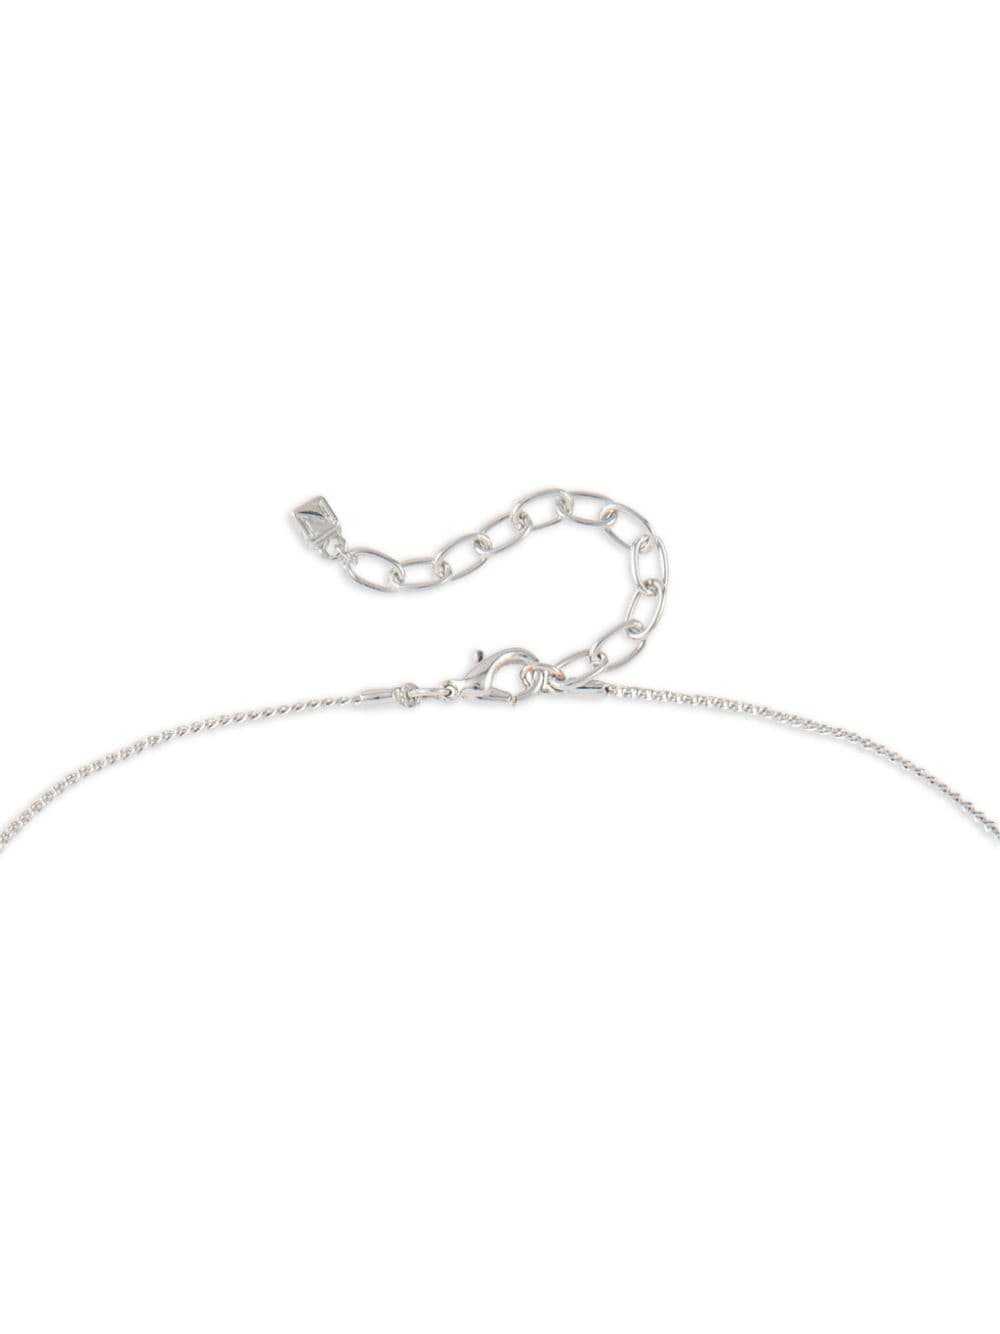 Nina Ricci 1990s pre-owned rhodium-plated necklac… - image 2